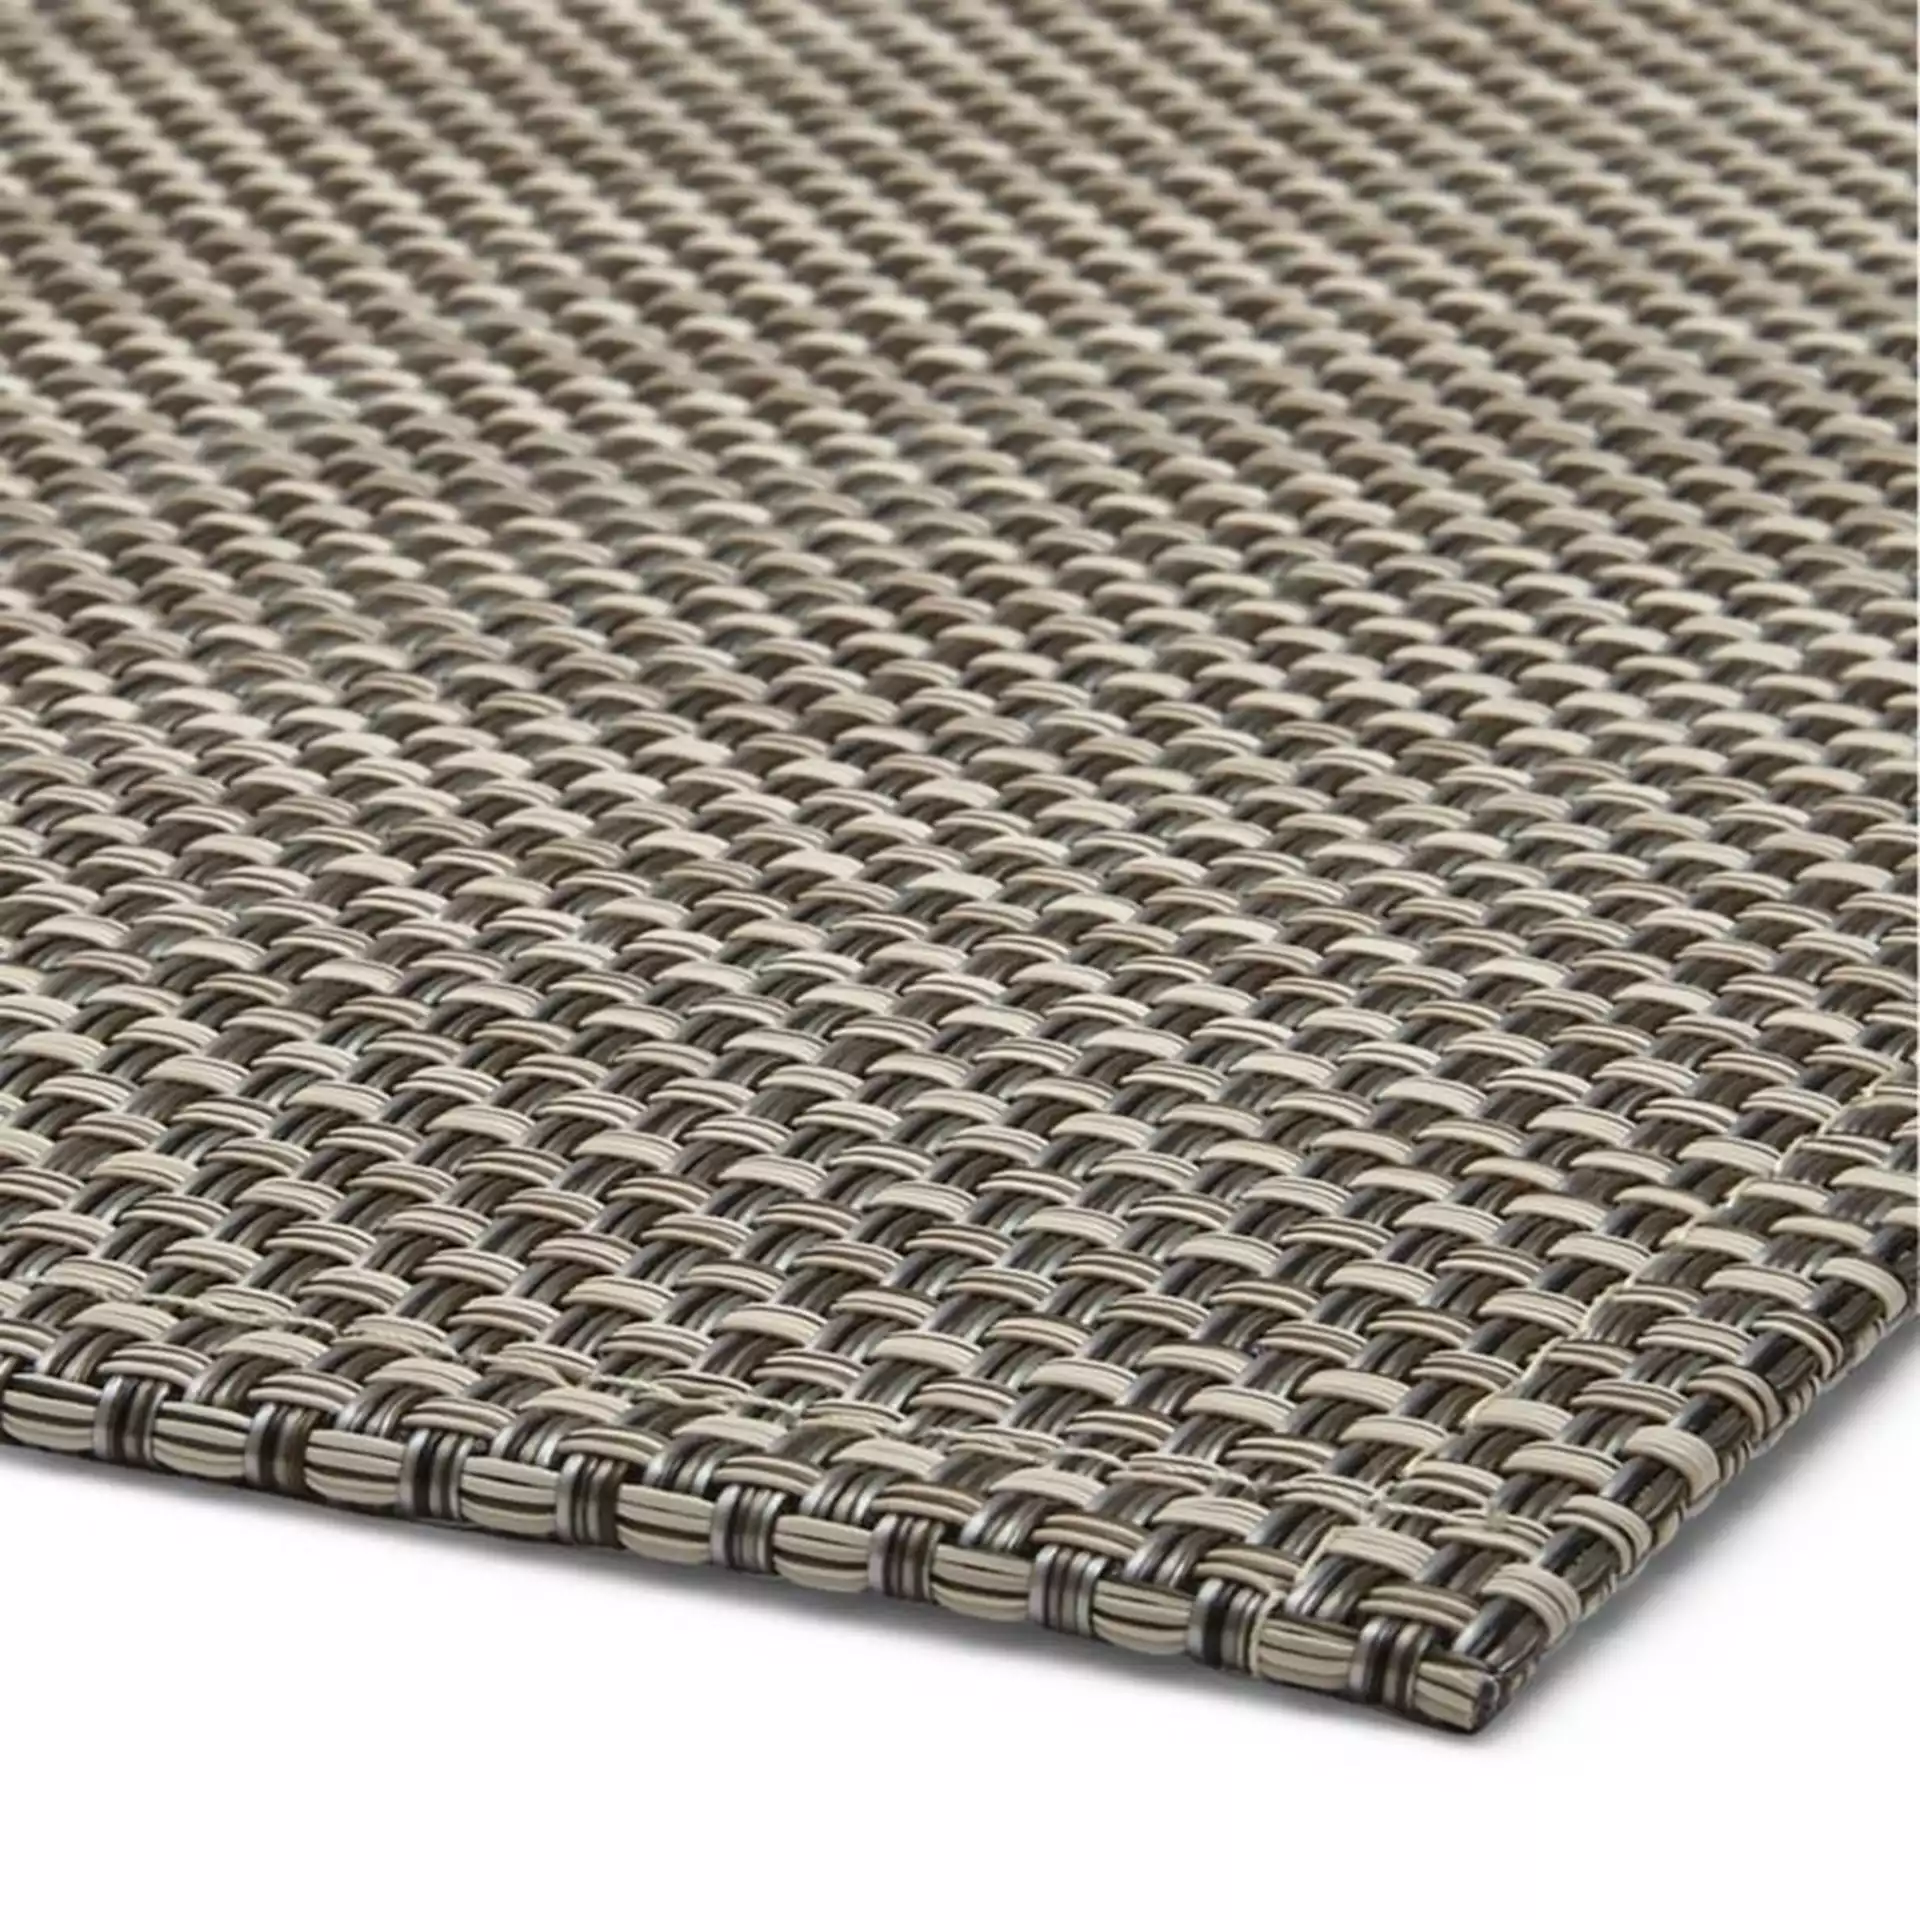 Chilewich Basketweave Oyster Woven Floormat 6'x9'